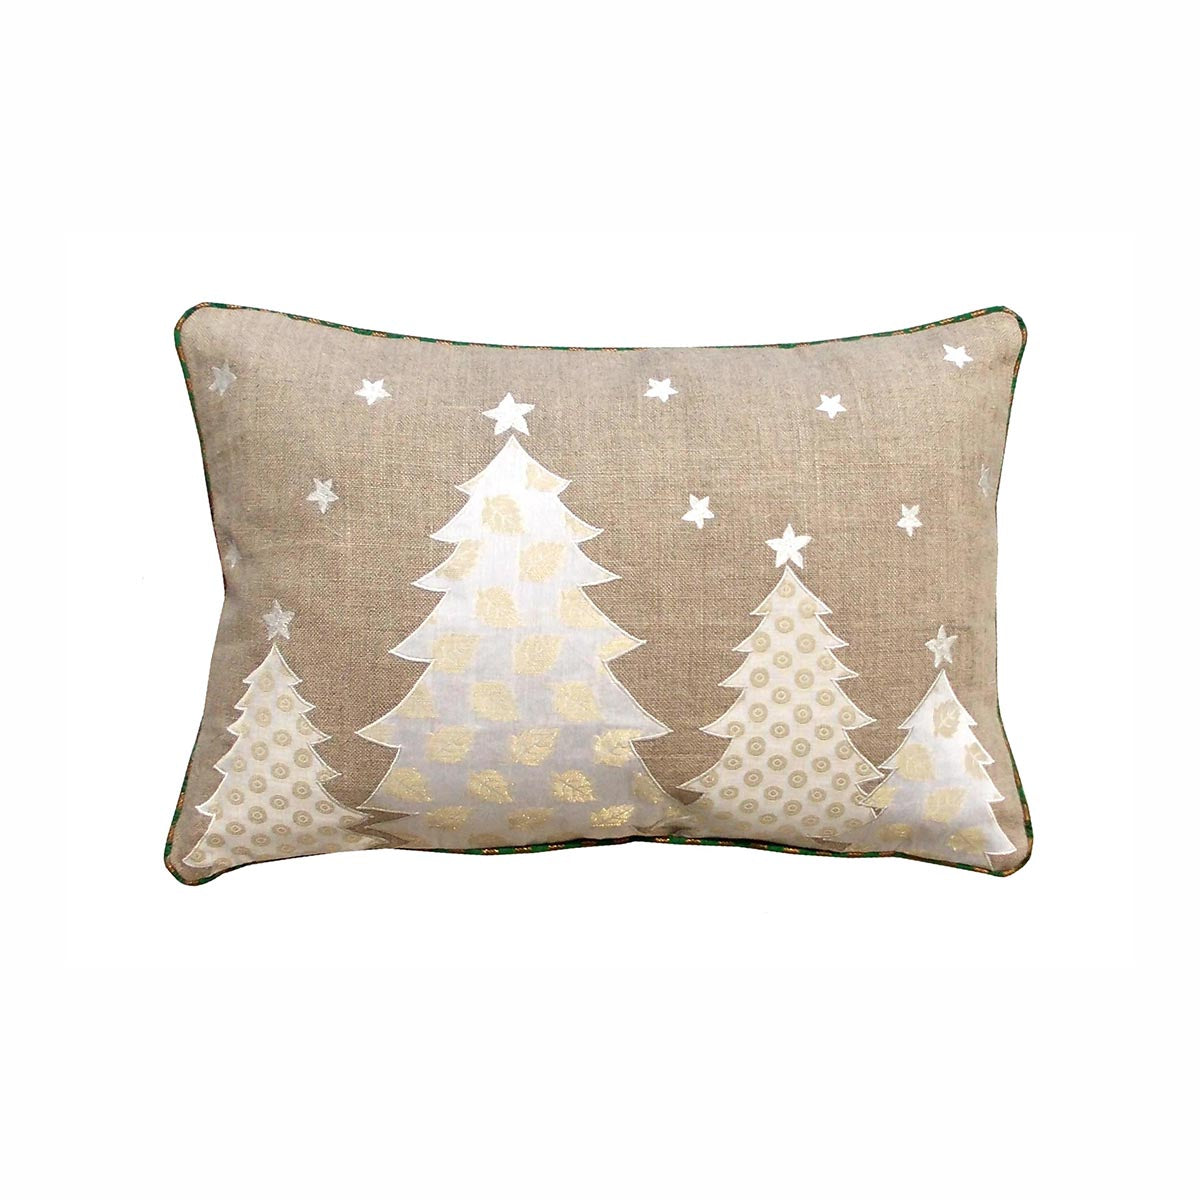 Christmas White Tree cushion cover,linen pillow cover